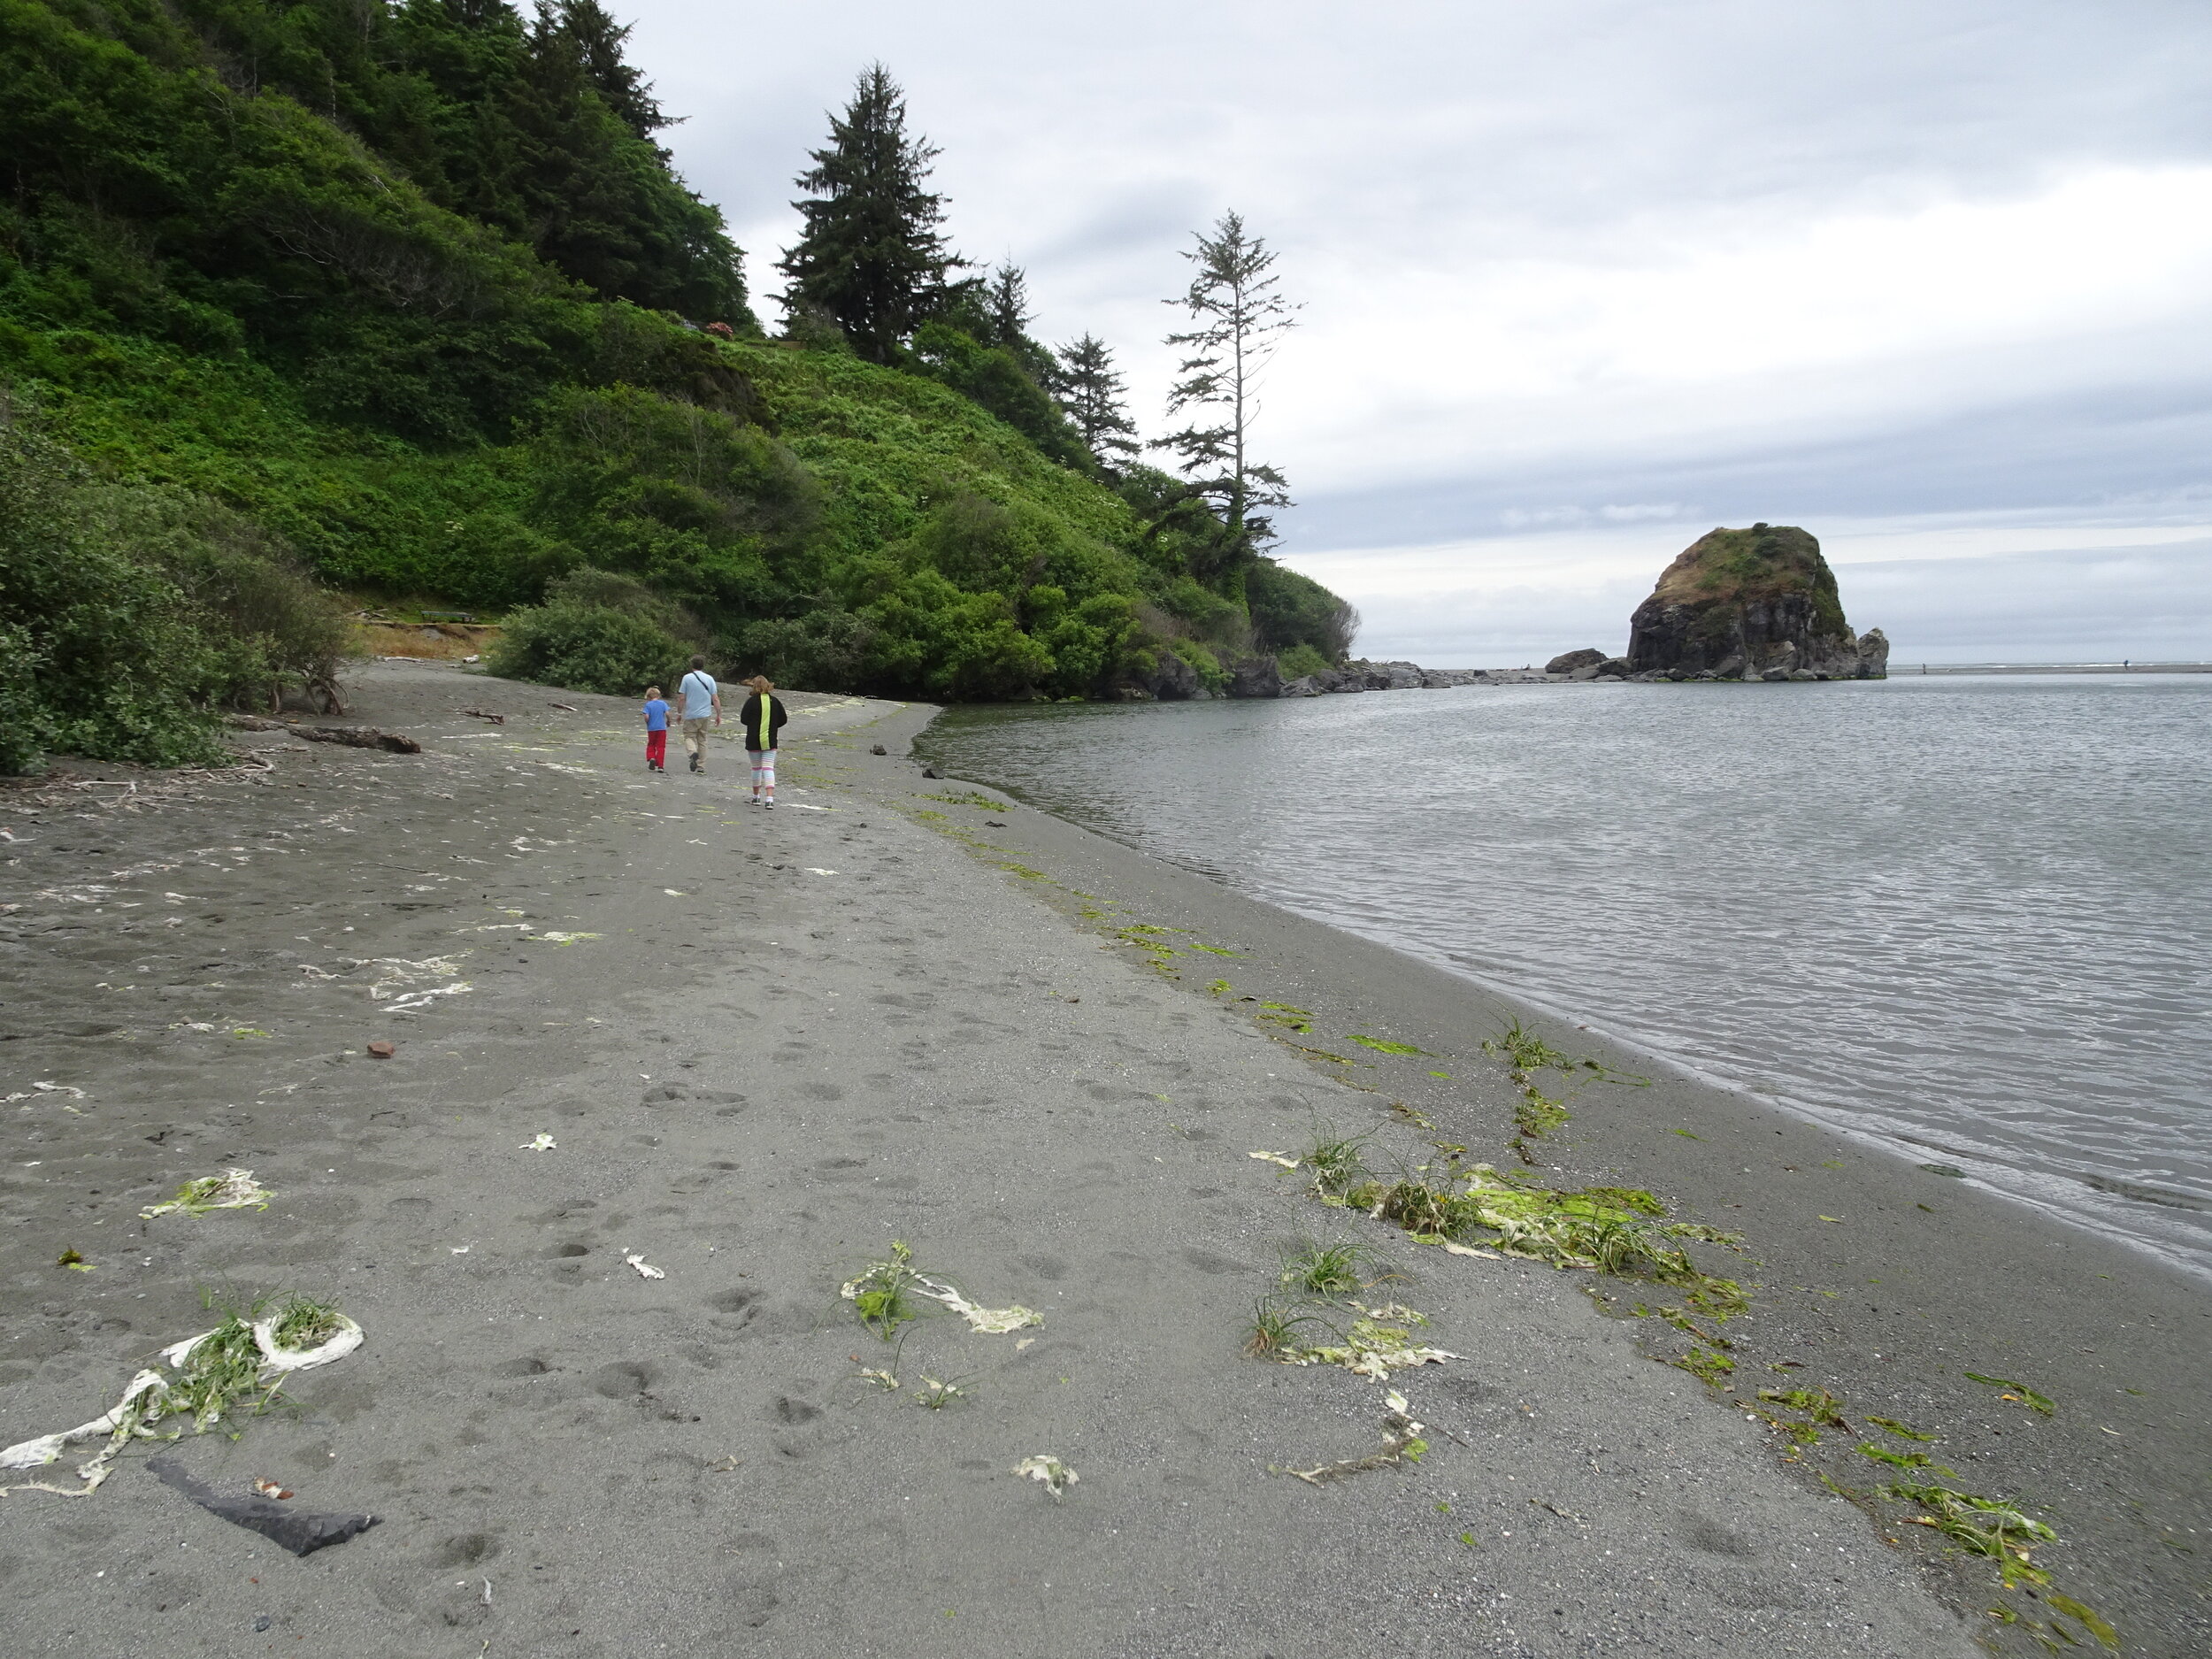 The beach along the Yurok Ceremonial Grounds.  We just need to get on the other side of that greenery to get to the beach we want to go to